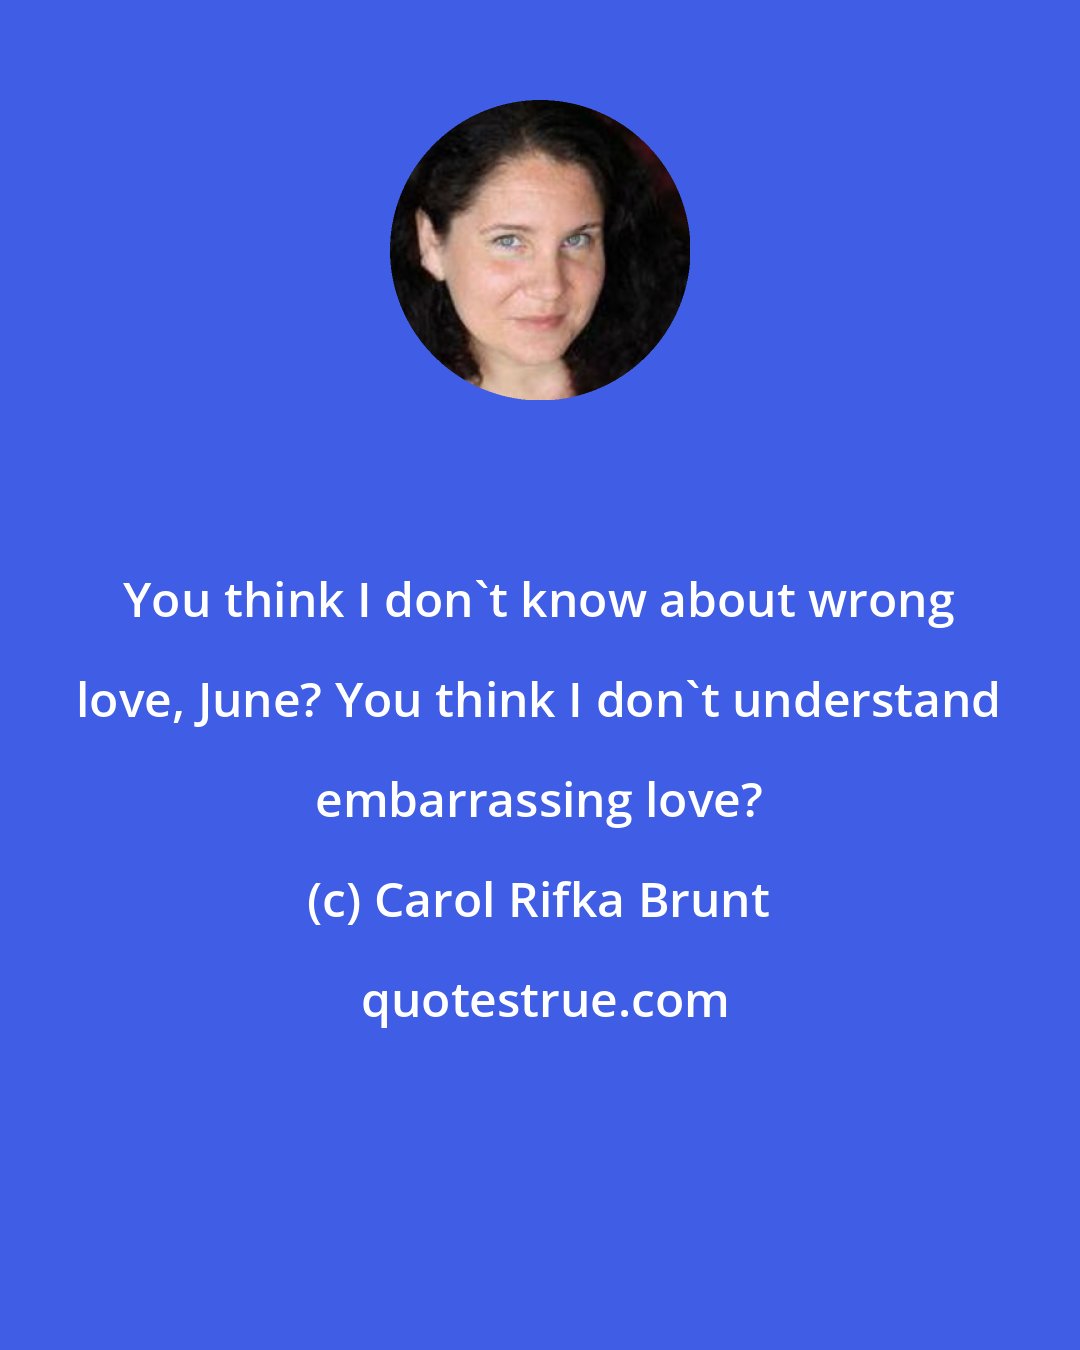 Carol Rifka Brunt: You think I don't know about wrong love, June? You think I don't understand embarrassing love?